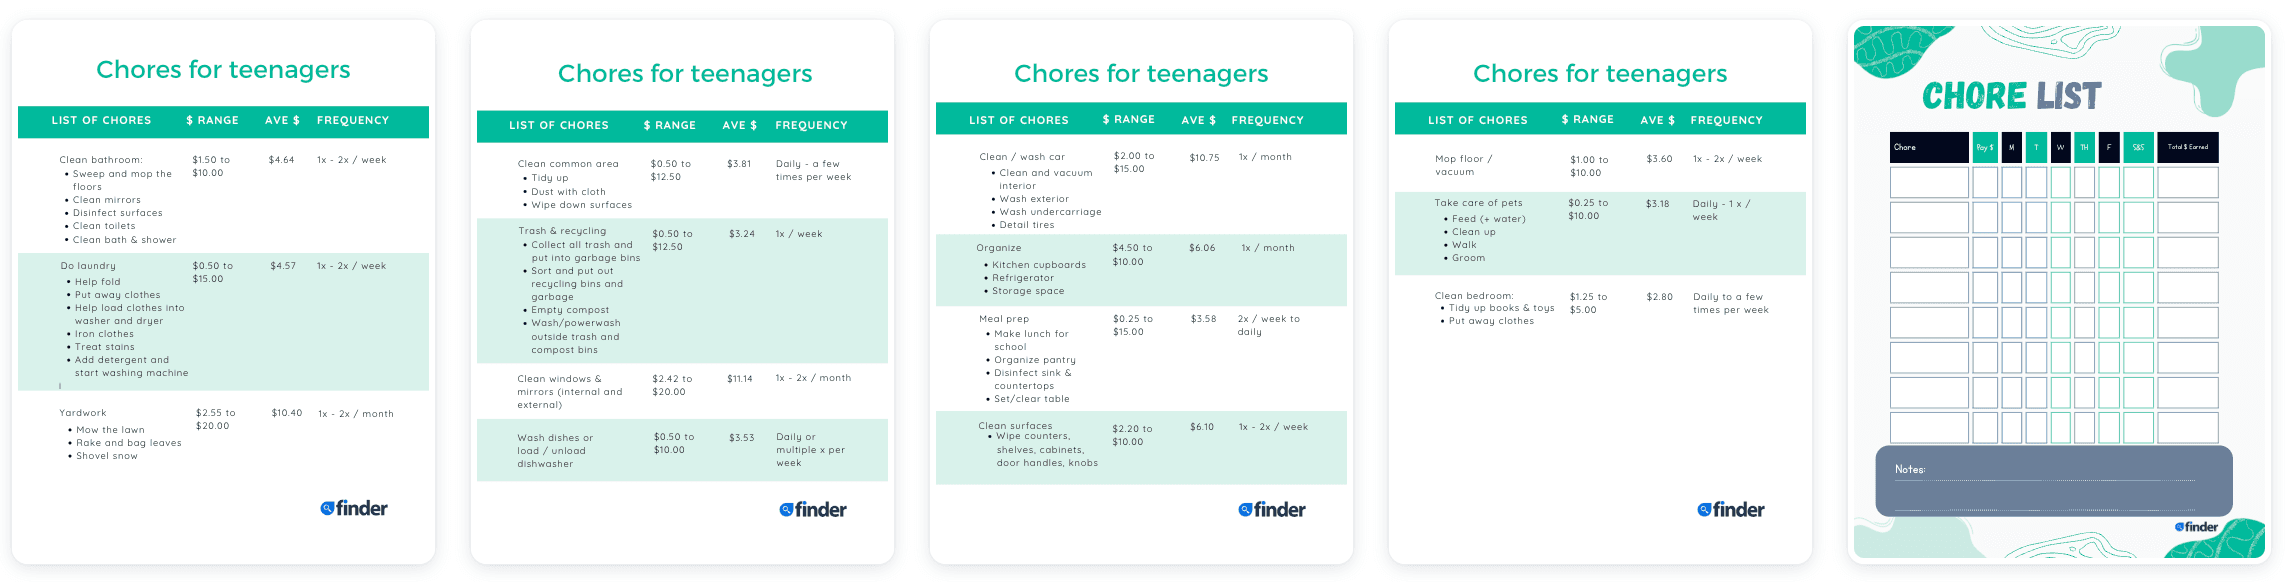 Download a PDF of chores for teenagers that includes a chore price list and chore pay scale